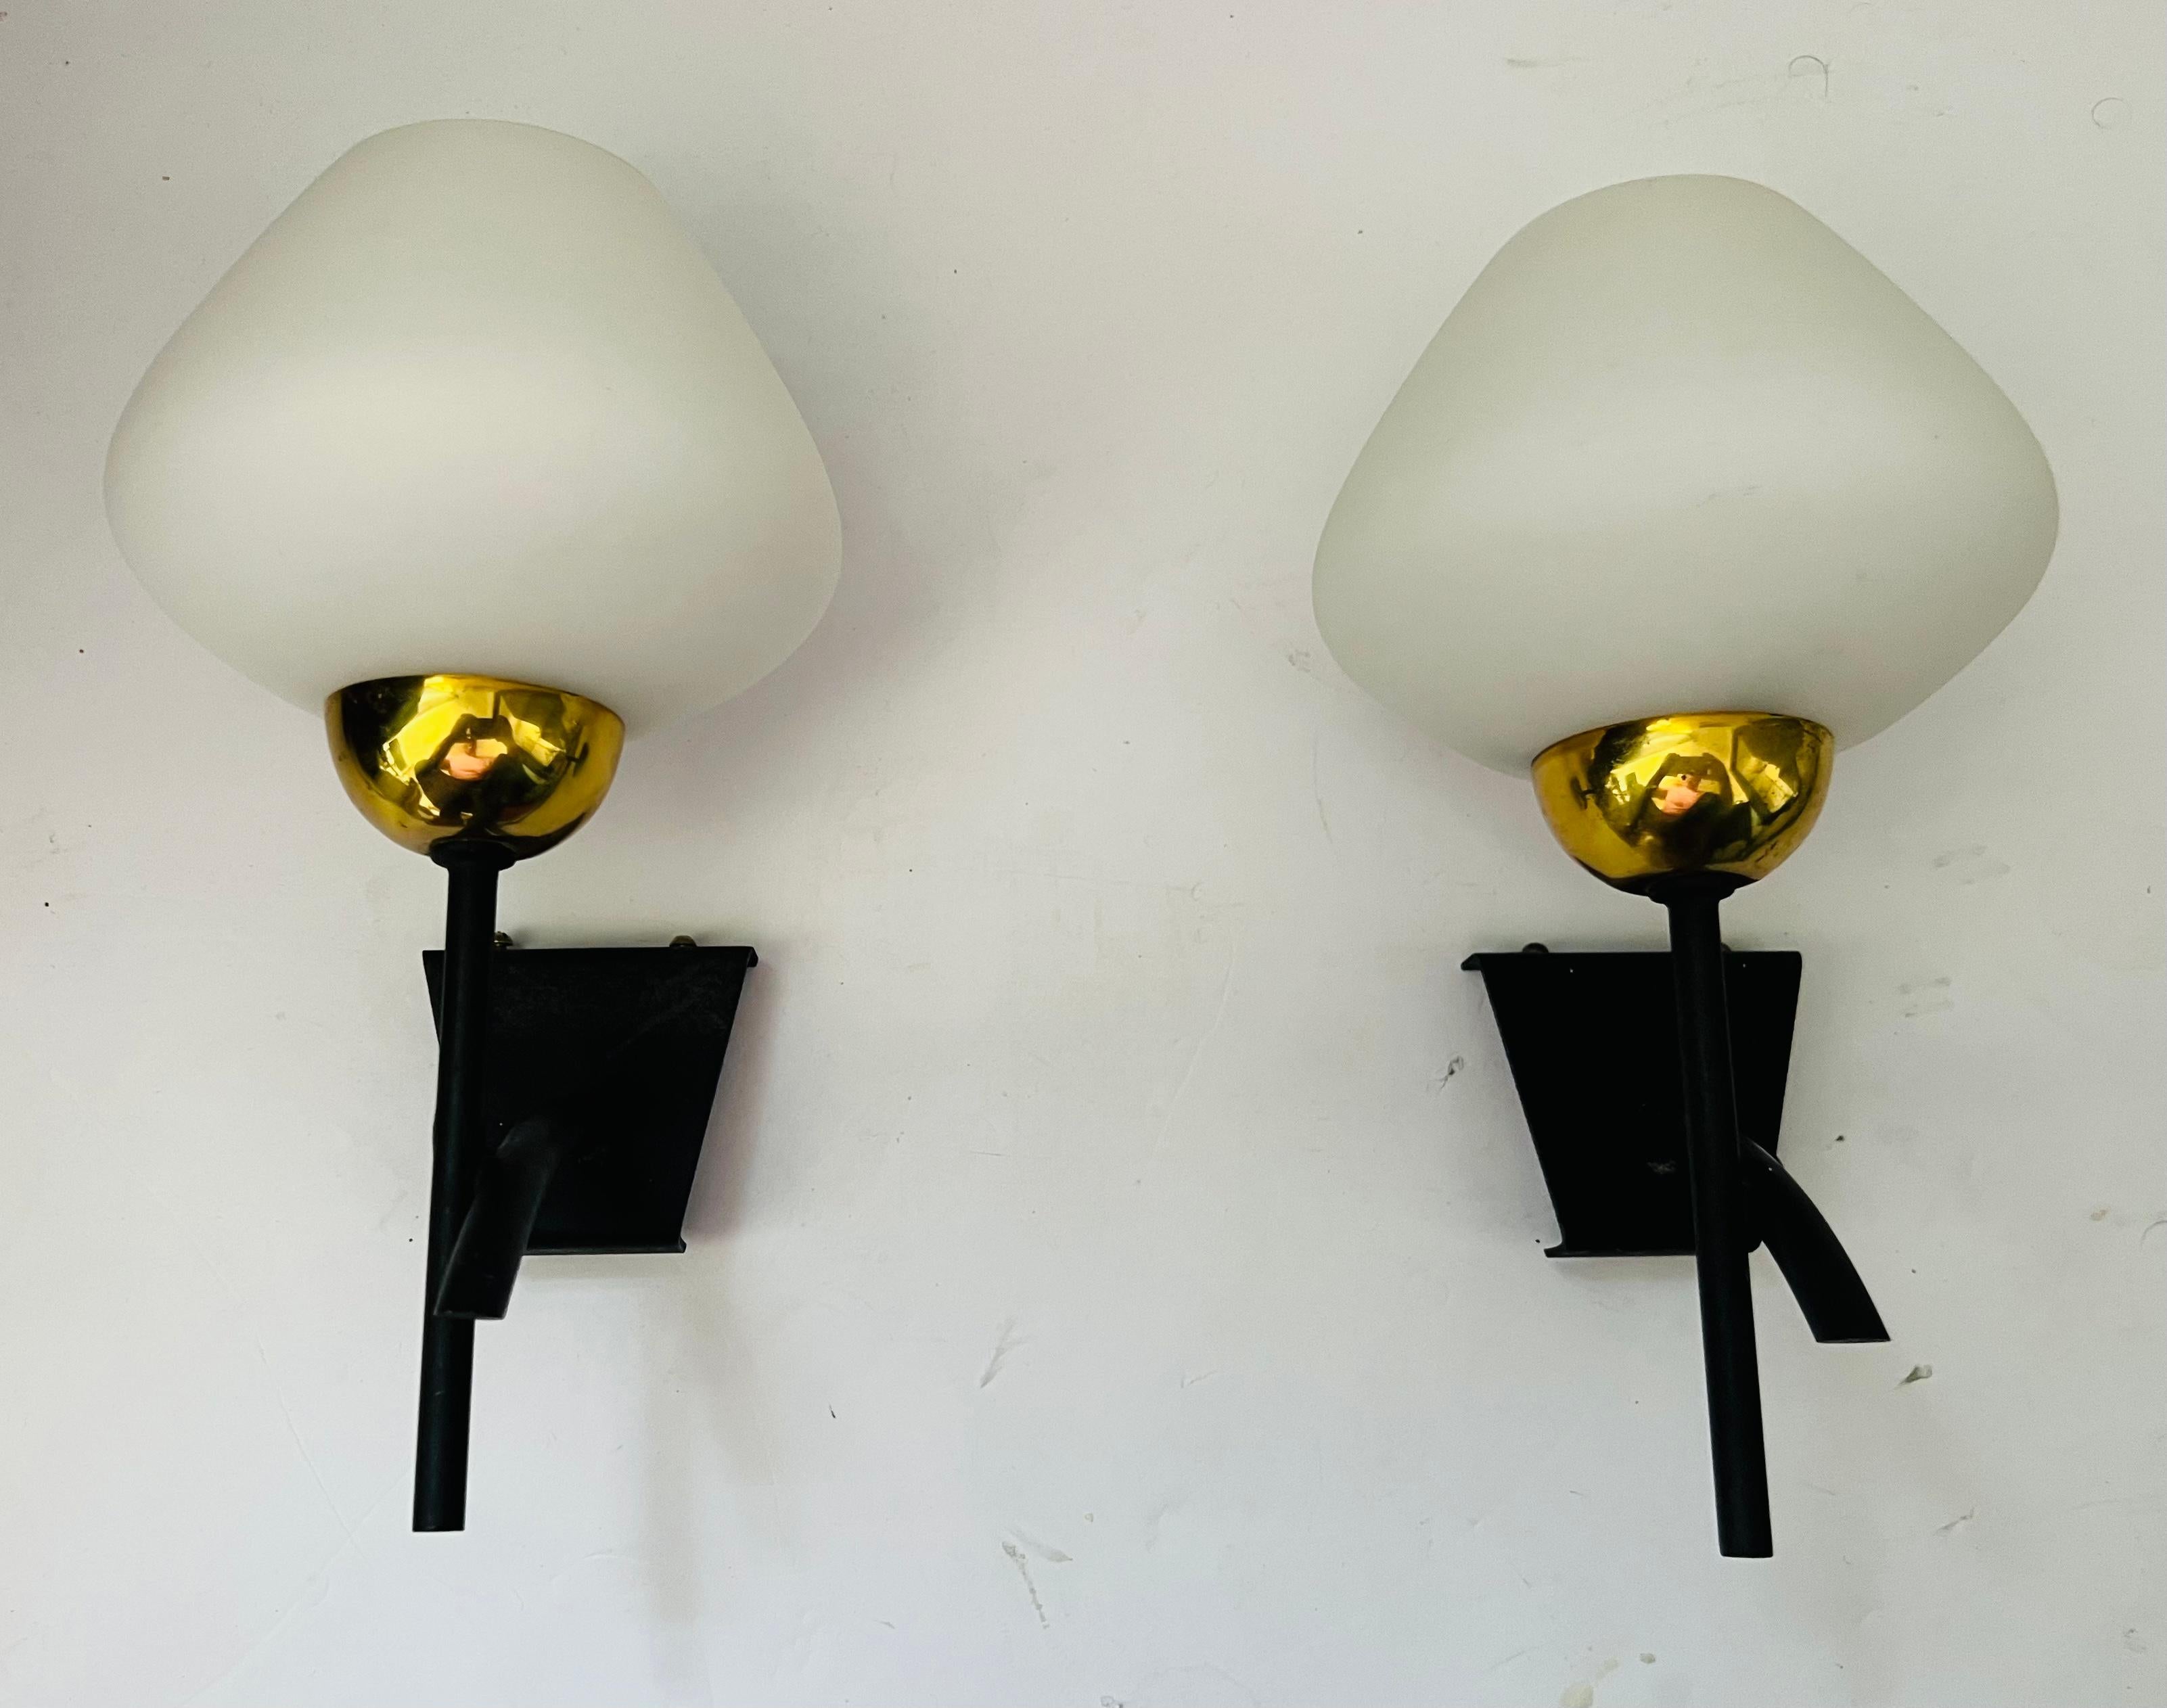 Pair of 1960s French midcentury wall lamps with matte black frames holding white glass shades by Lunel. Rewired.